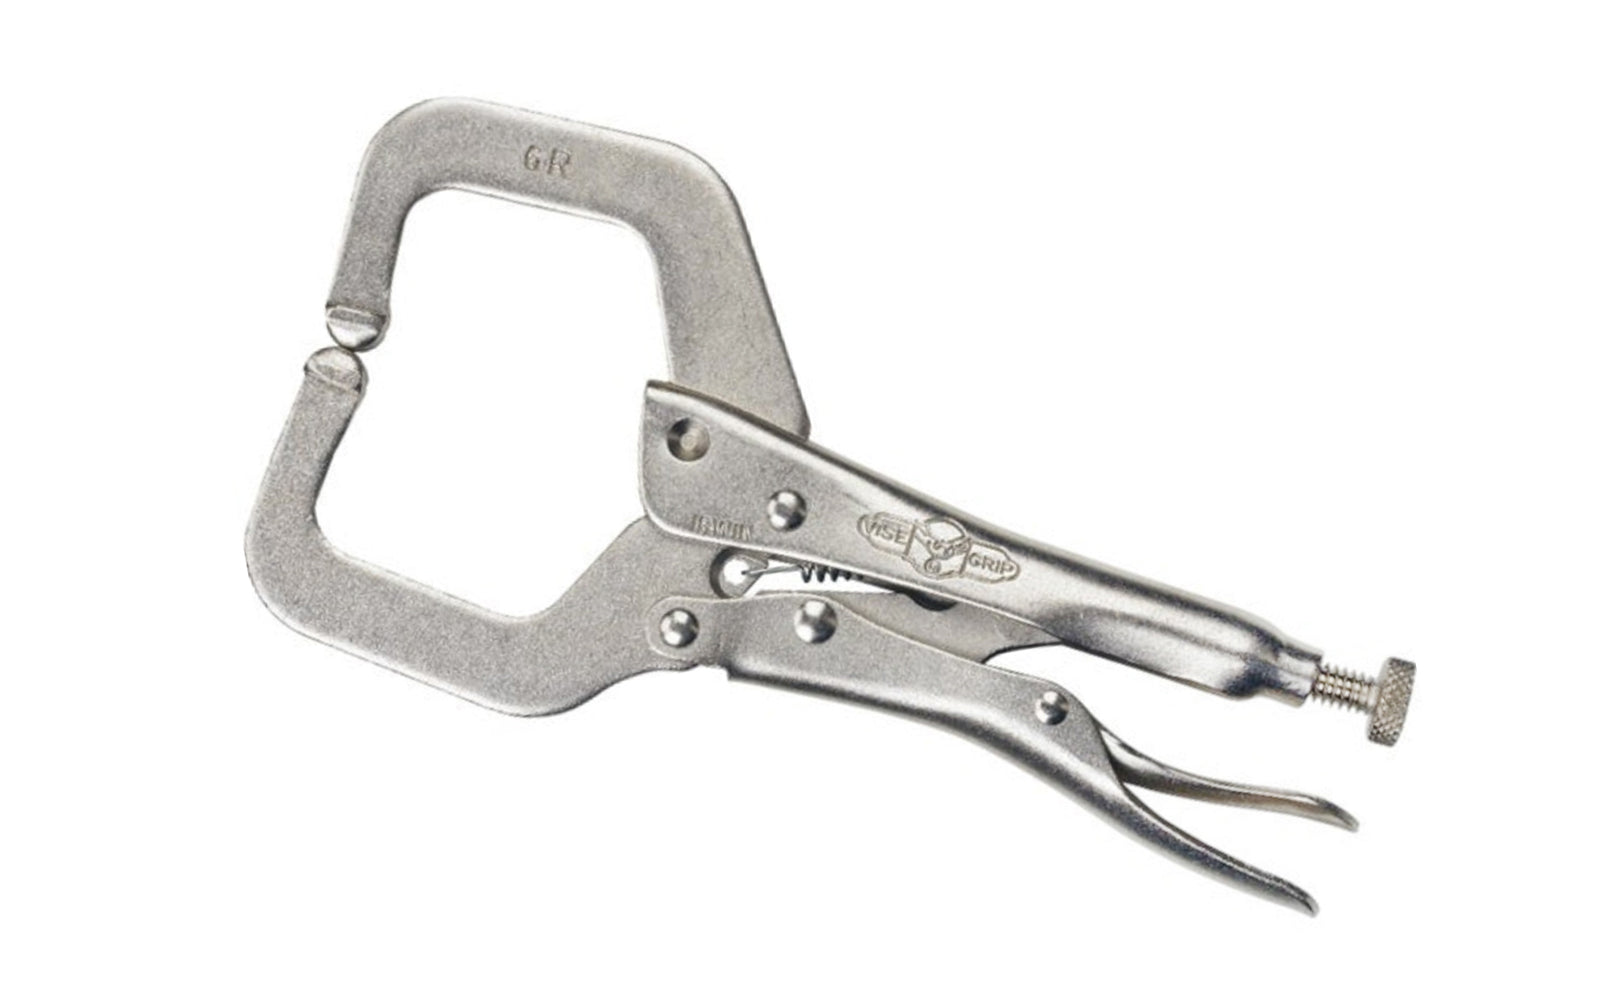 Irwin 6" "The Original" Vise Grip Locking C-Clamp Plier. Model 6R. Item No. 17. Turn screw to adjust pressure and fit work. Stays adjusted for repetitive use. Constructed of high-grade heat-treated alloy steel for maximum toughness & durability. 2" Jaw Capacity.